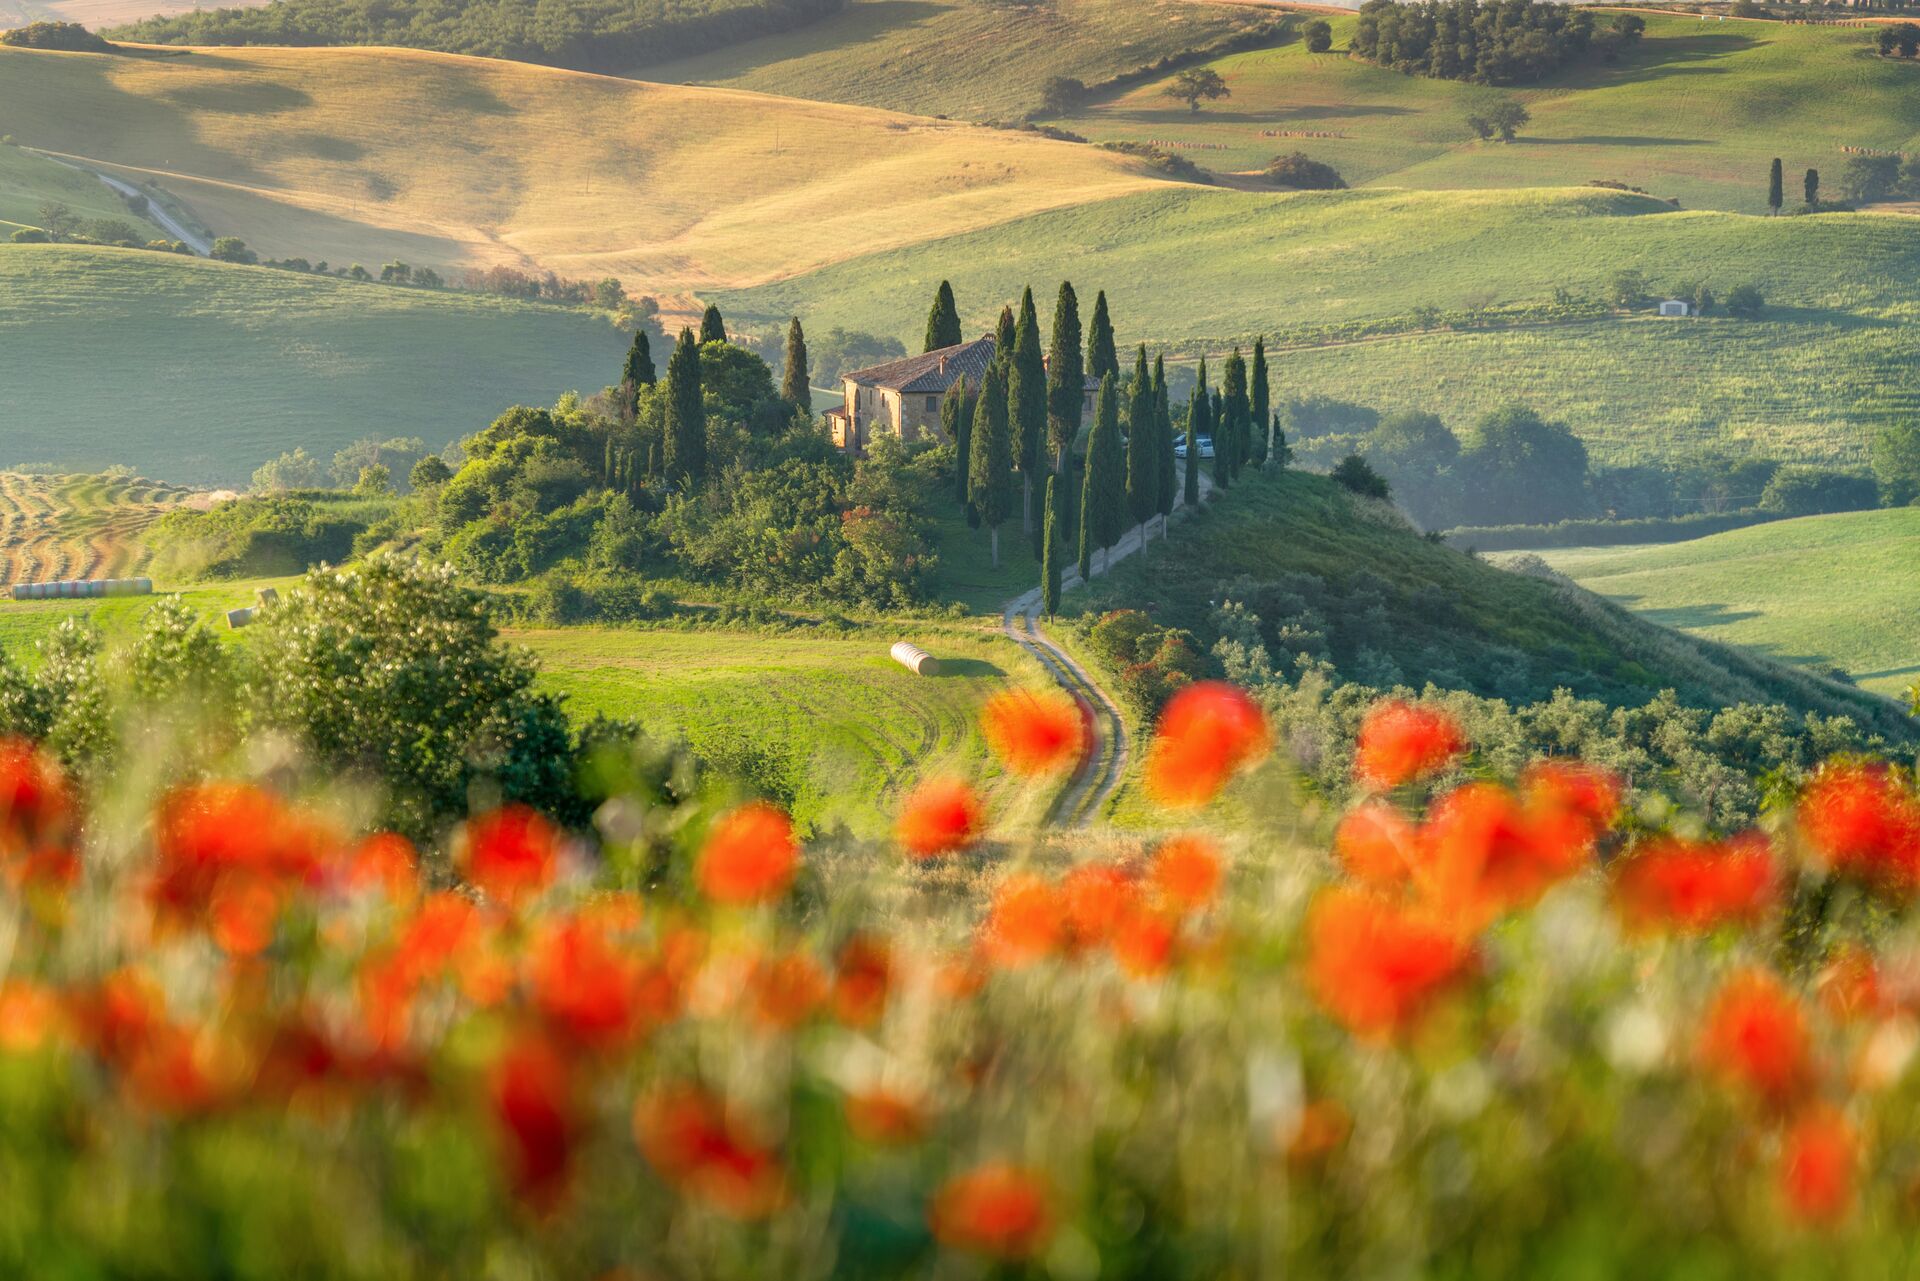 Typical Tuscan farmhouse surrounded by rolling hills and bright red poppies in the foreground